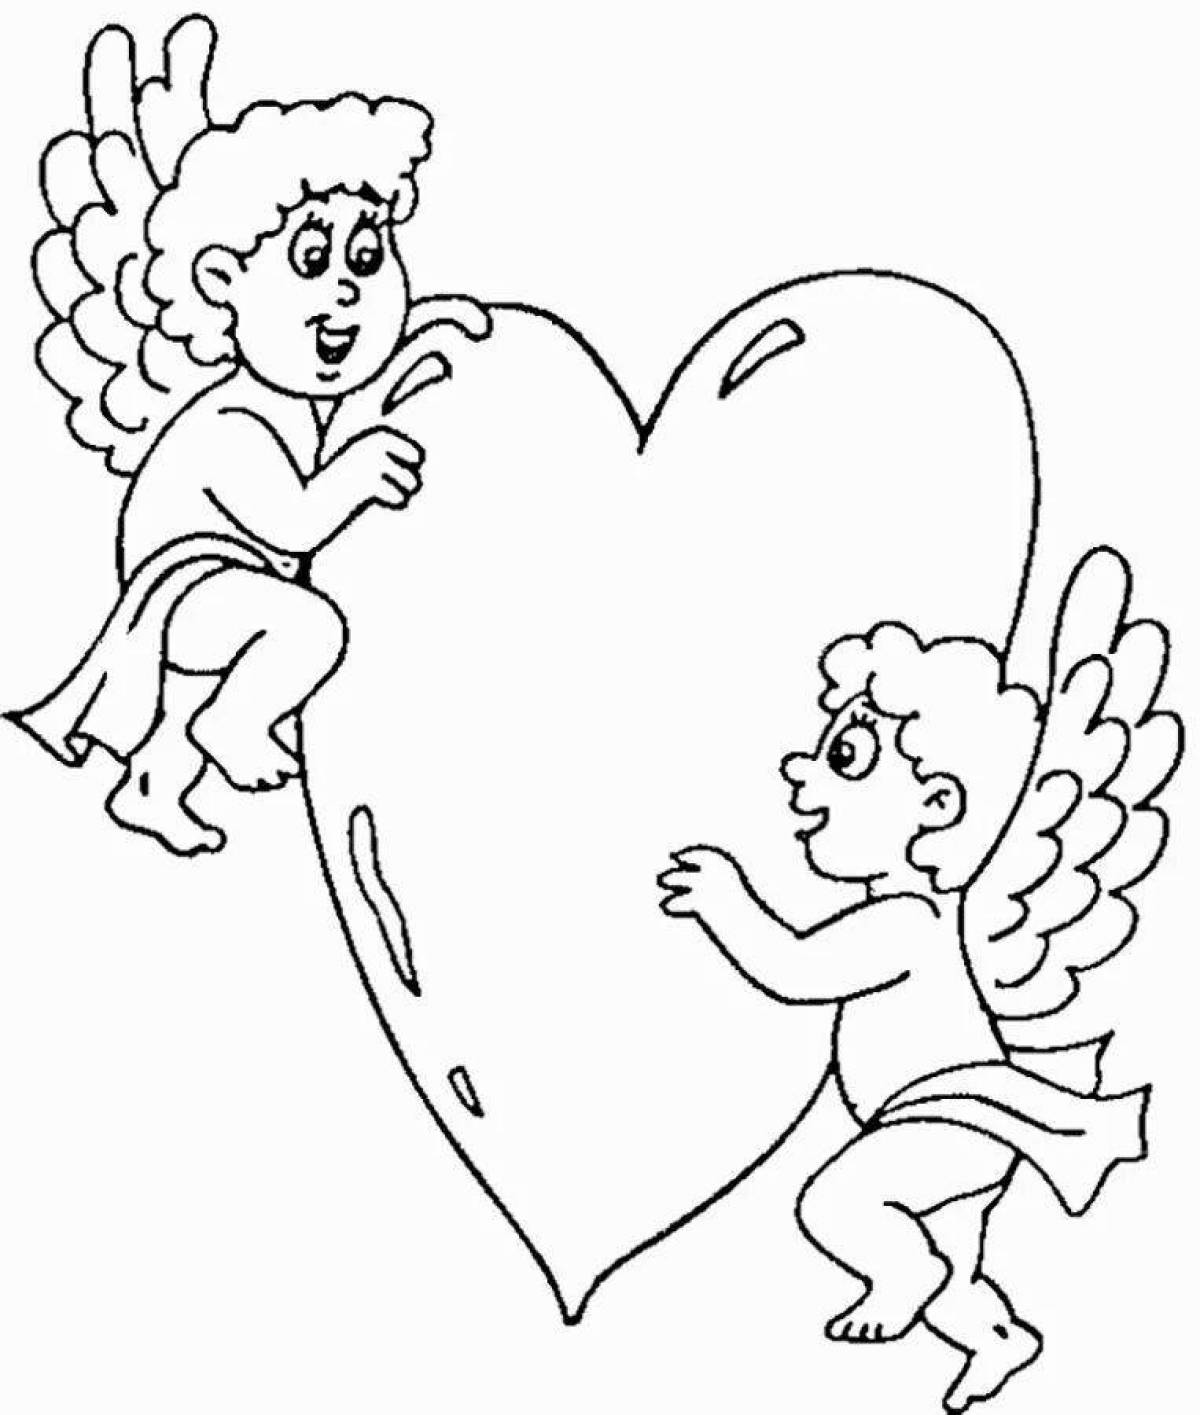 Soulful valentines coloring book